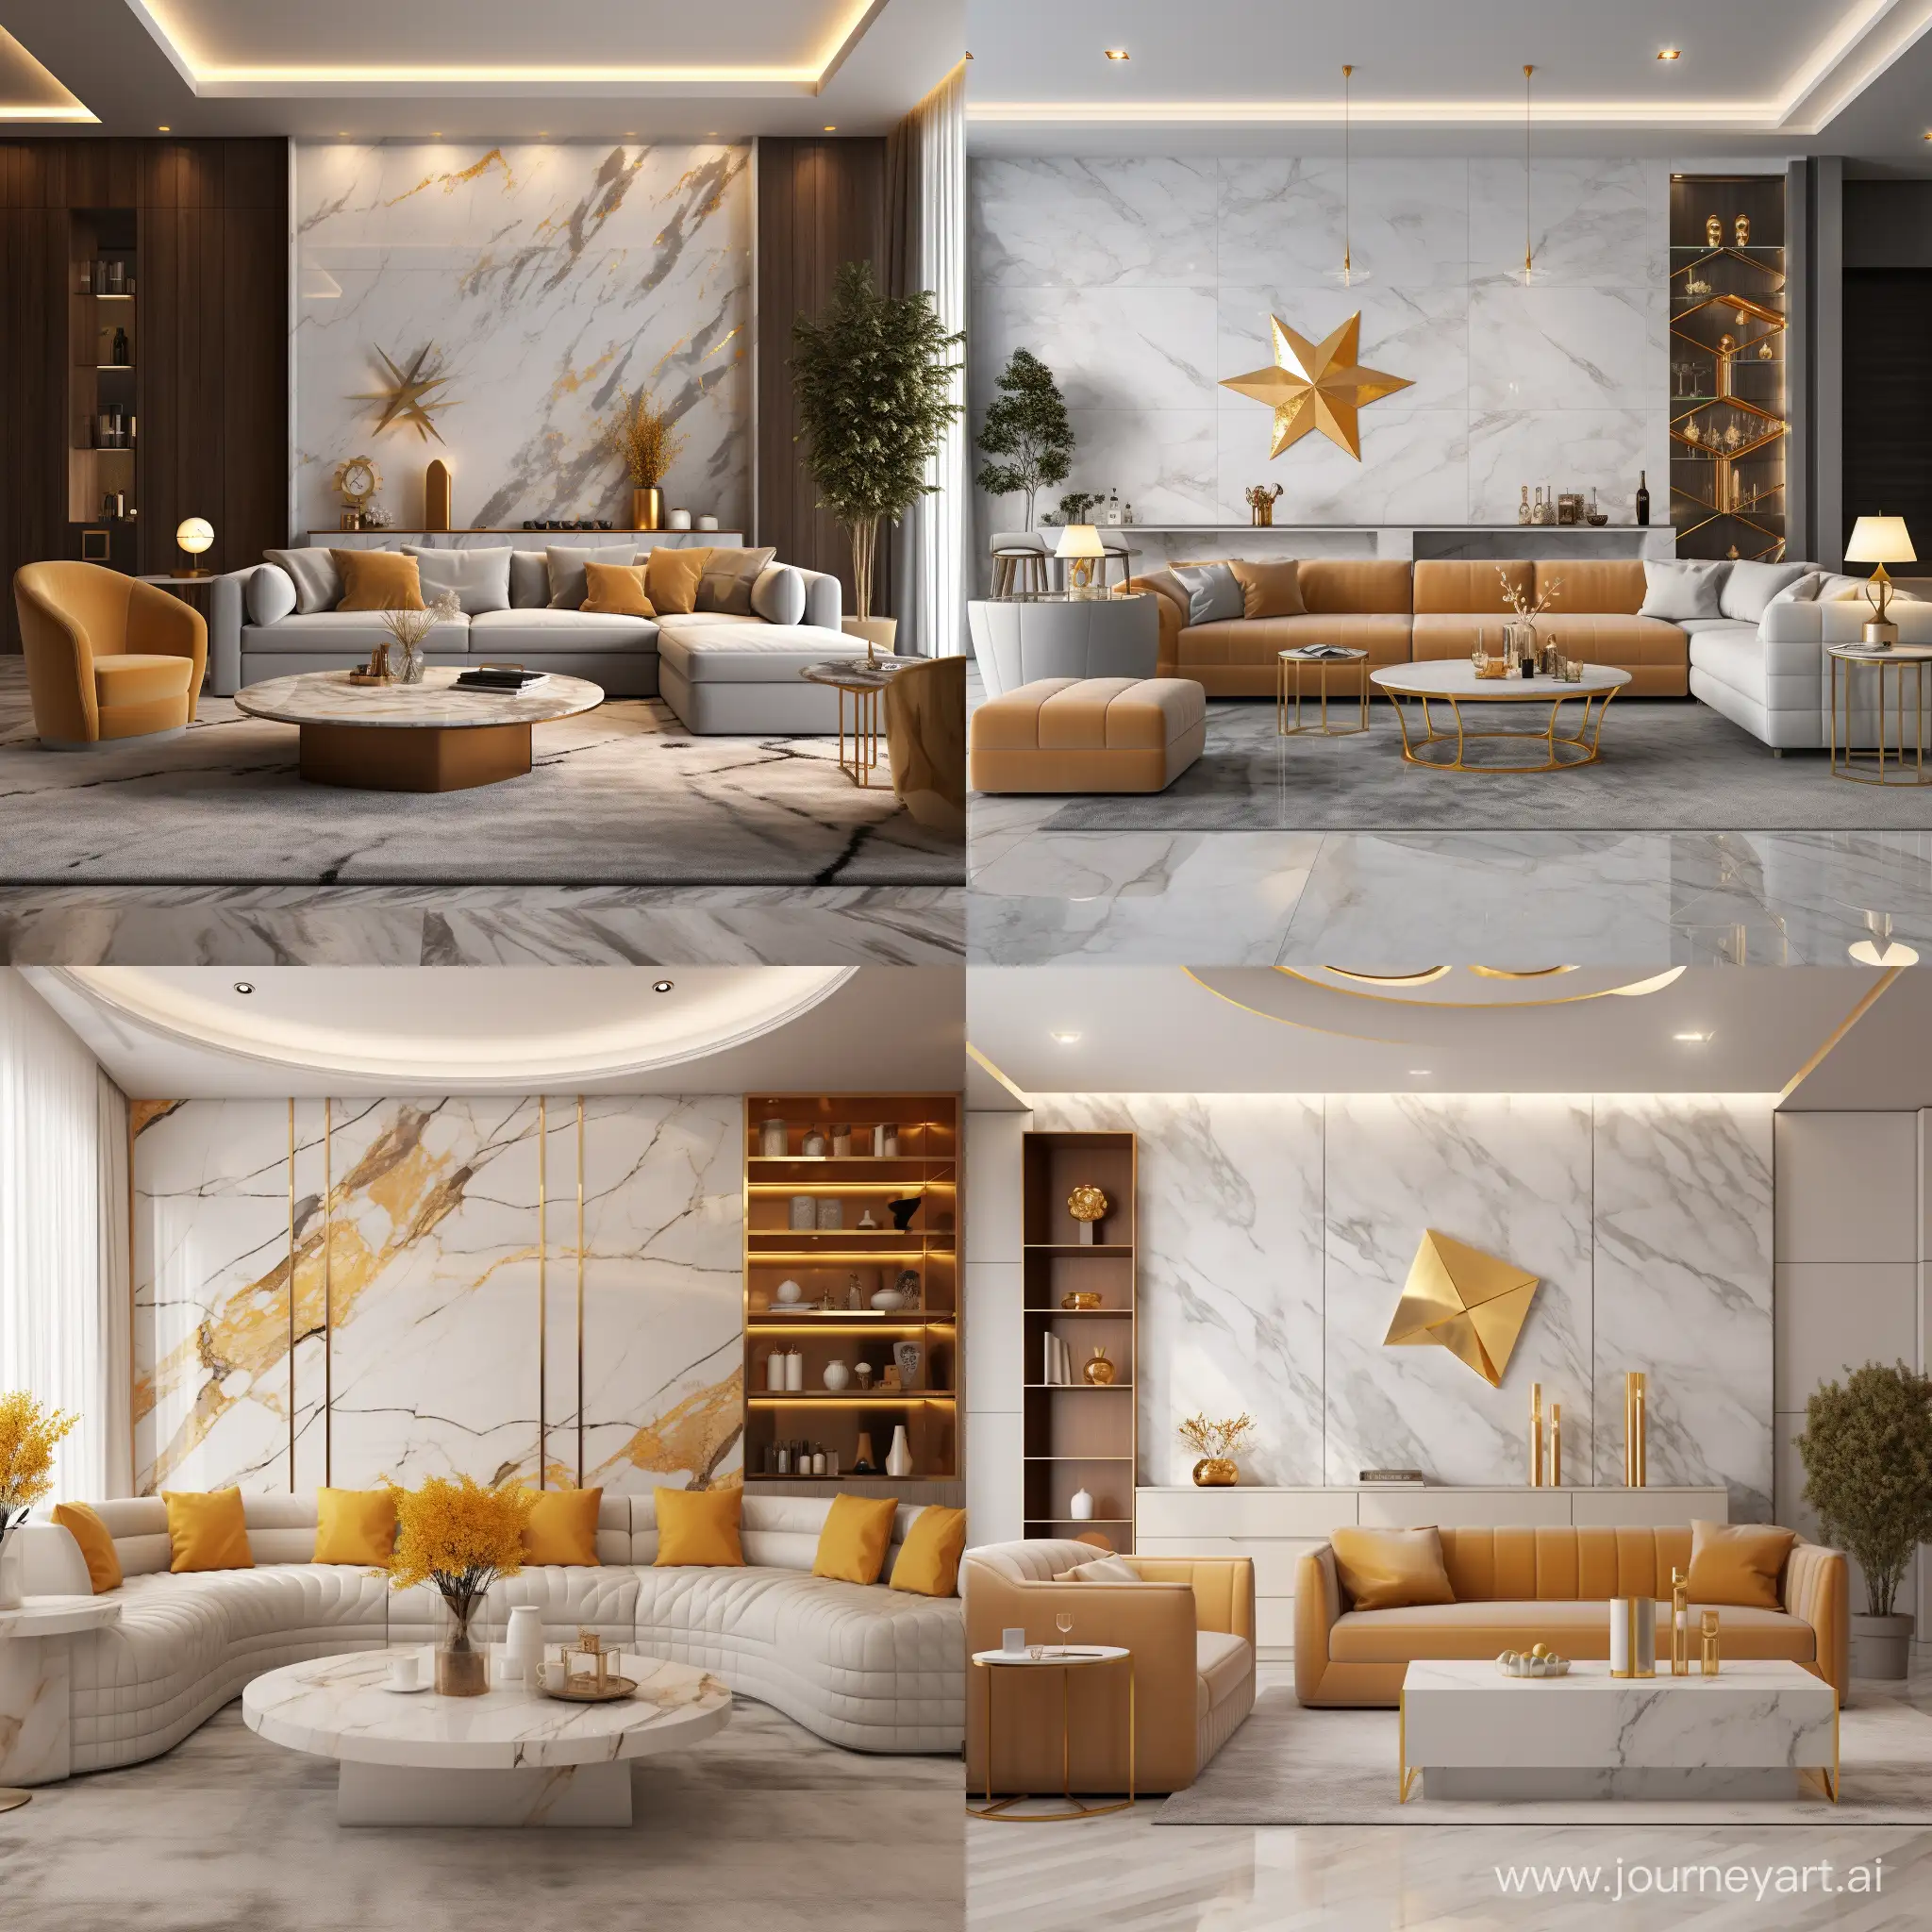 A luxurious and modern interior design featuring a beautiful decorative white marble case with golden veins and a golden star pattern strap. The box is placed on a wooden surface and contains some grade 1 saffron. The room has contemporary lighting fixtures suspended from the ceiling and wall sconces that cast a warm glow. Modern furniture including sofas and tables can be seen in the background, placed in front of large windows that let in plenty of natural light. Wooden elements are prominent in the room design, including floor and wall coverings.